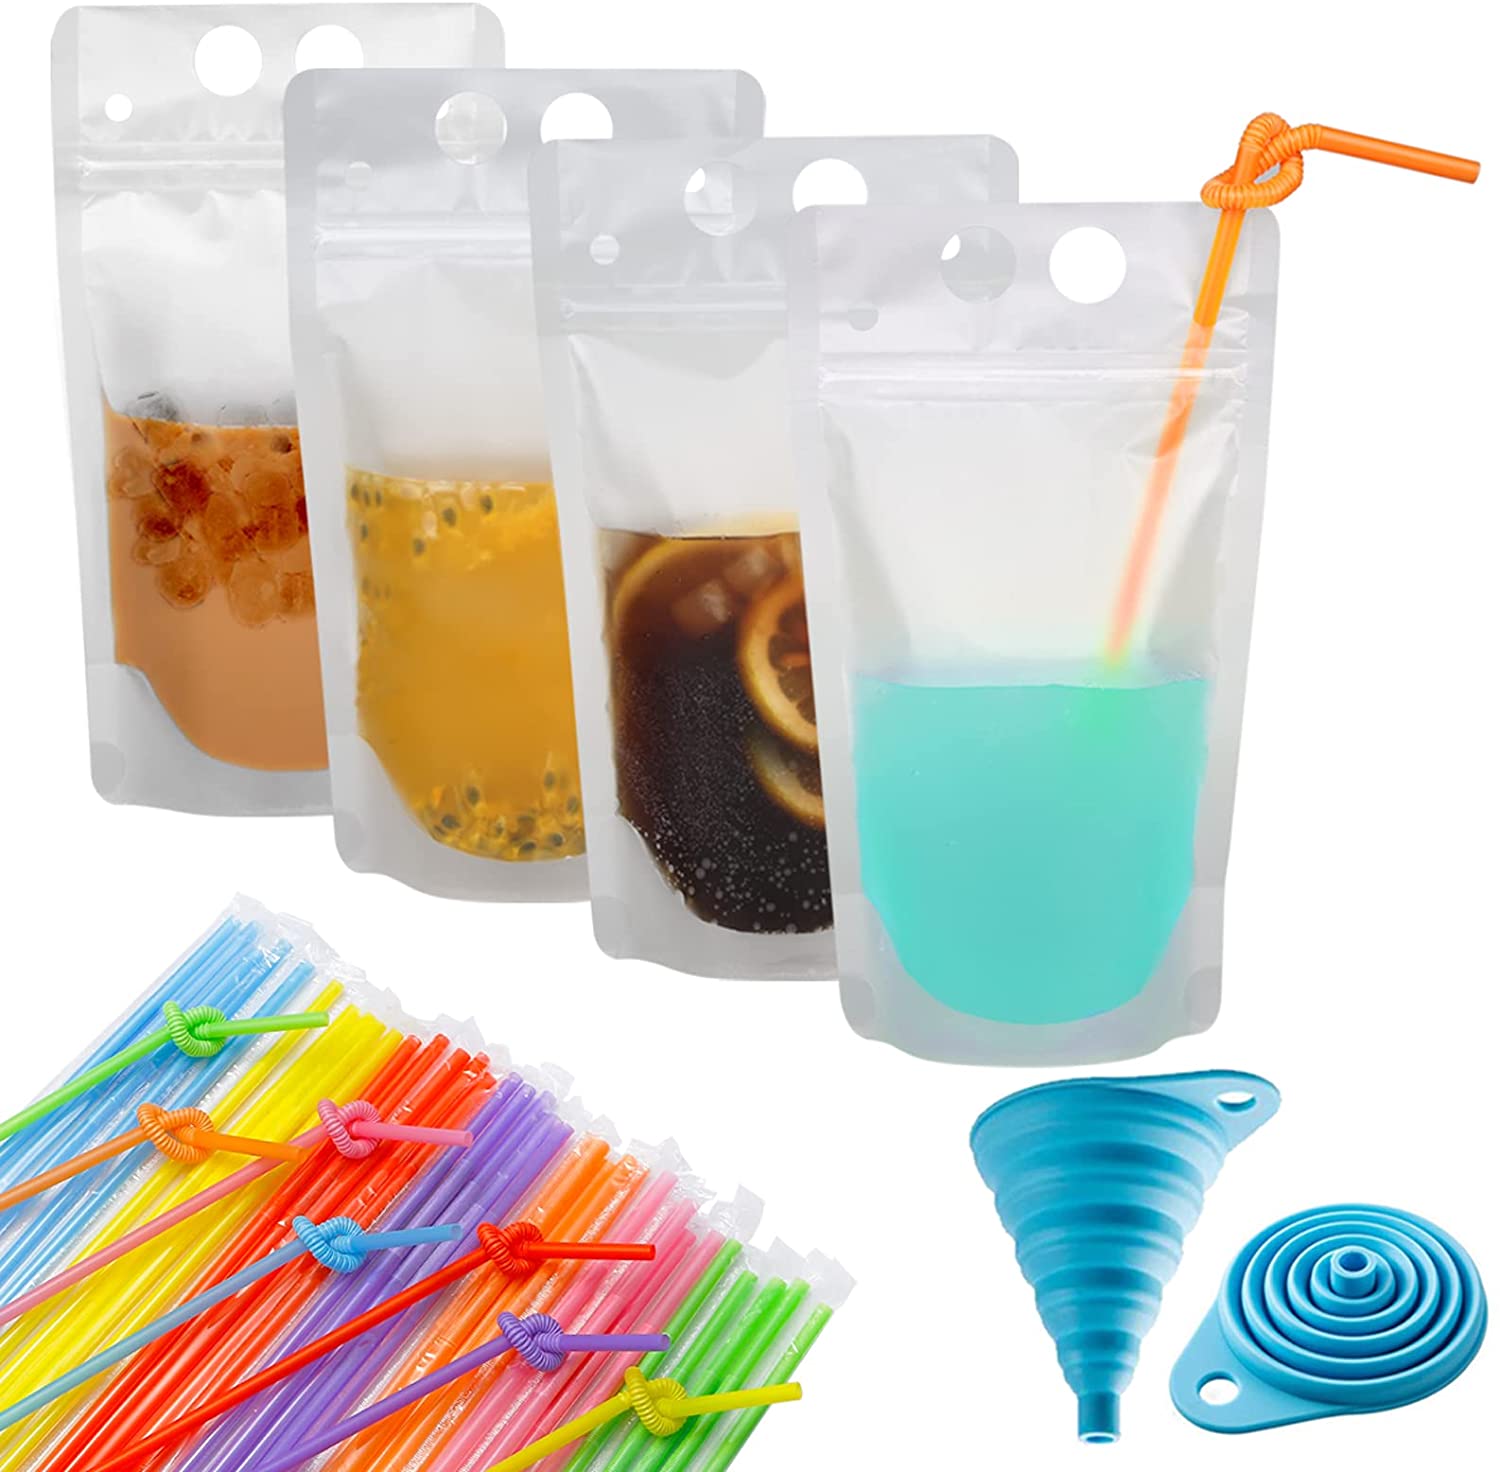 100 Pcs Zipper Plastic Pouches Drink Bags,Heavy Duty Hand-Held Translucent frosted Reclosable Stand-up Bag 